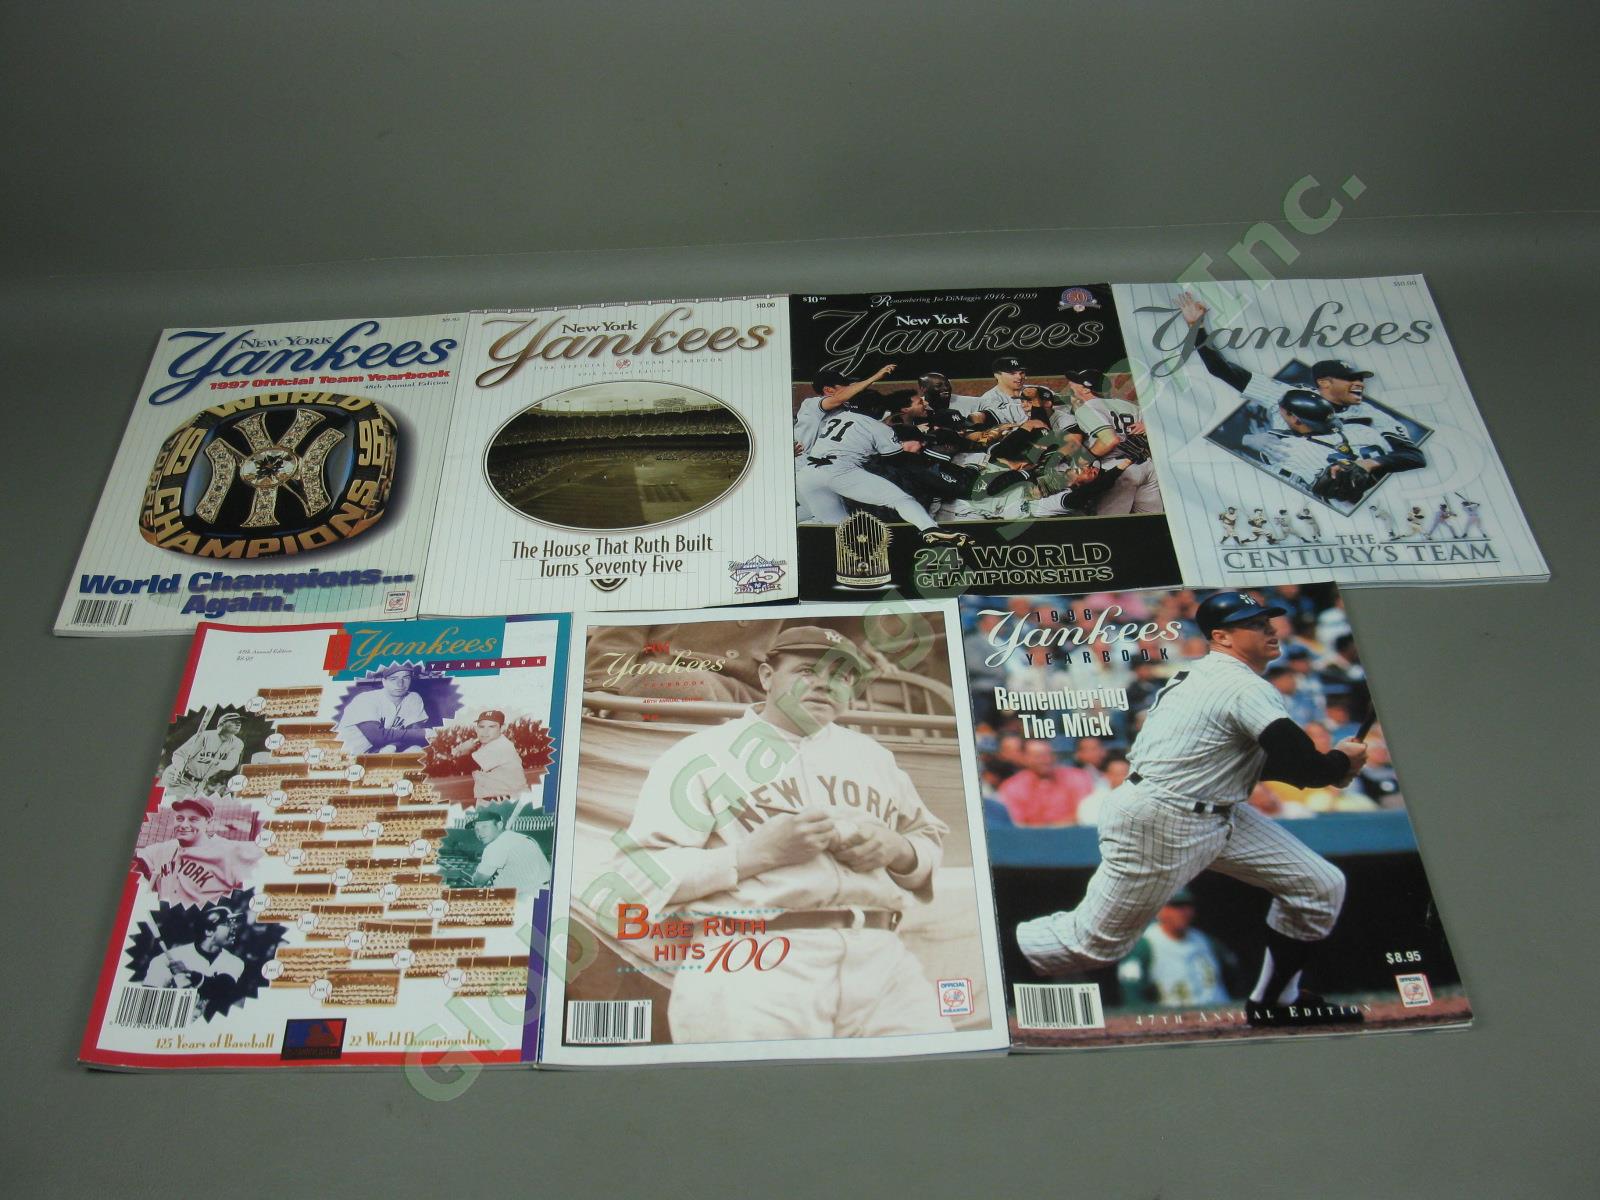 41 NY Yankees Yearbooks Lot Every One From 1967-2007 + 2 Scorecards + 3 Programs 7